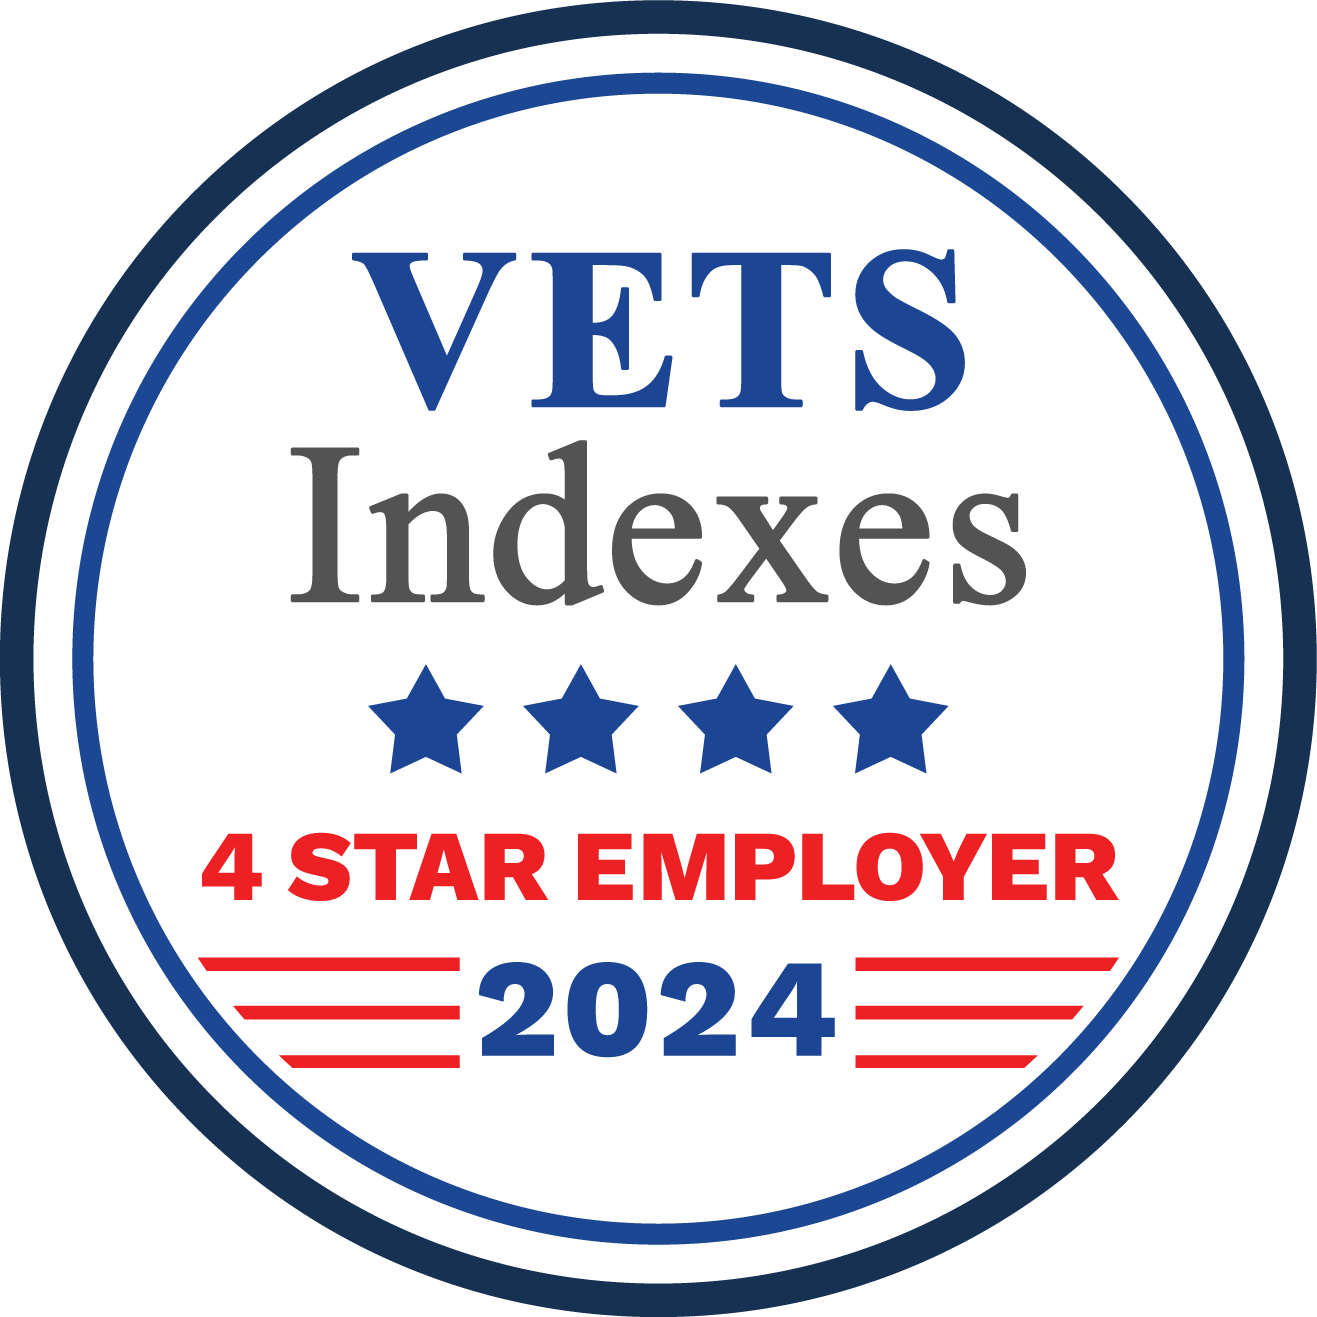 VETS Indexes 2024 4-Star Employer